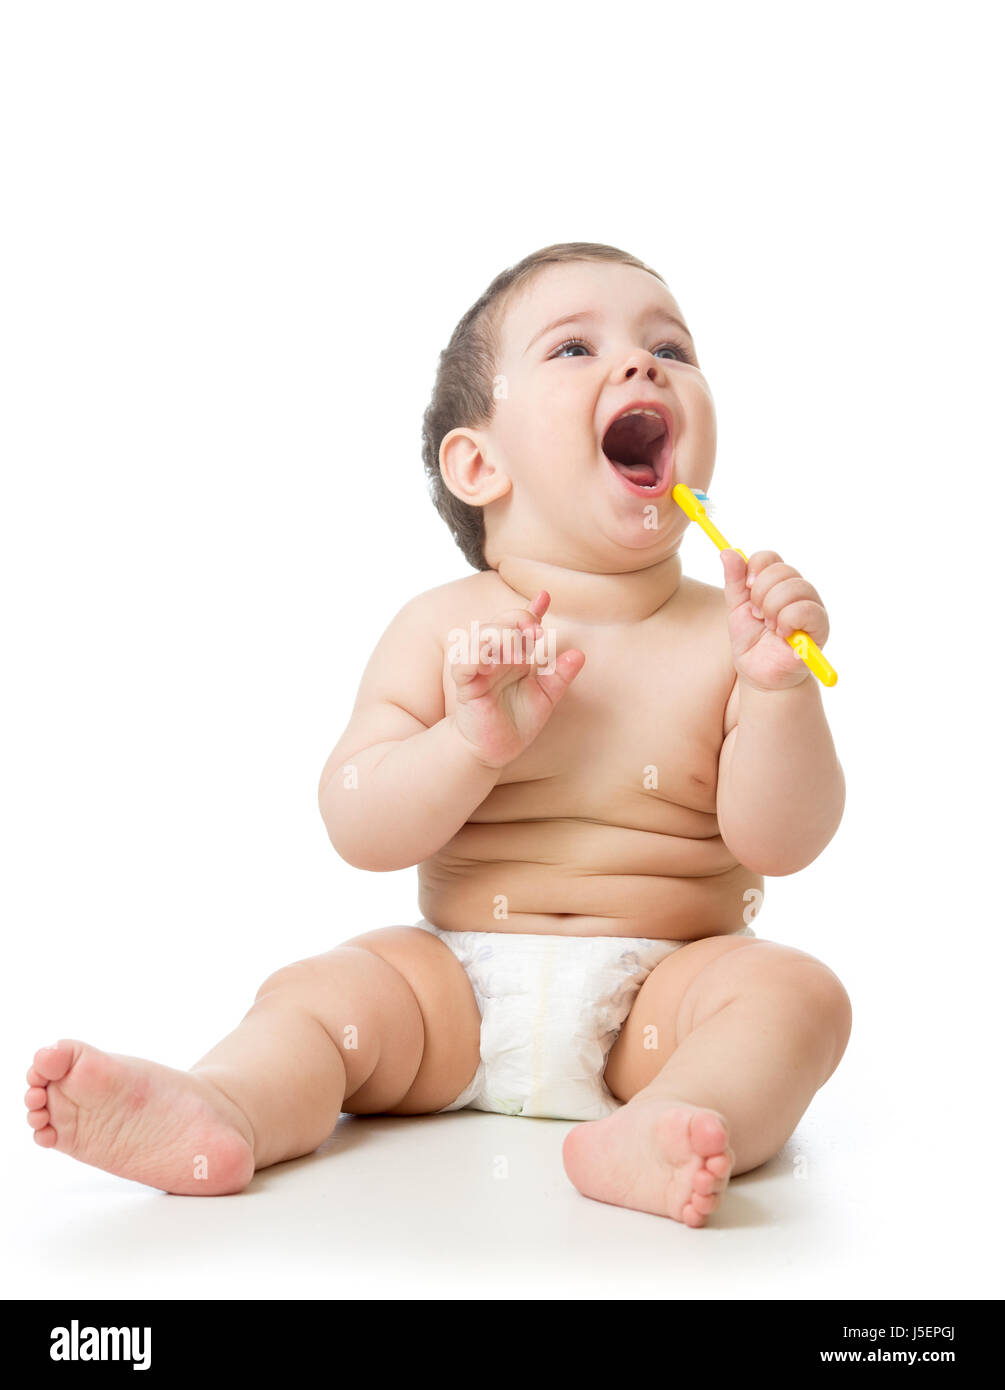 Cute child brushing teeth and smile, isolated over white. Stock Photo